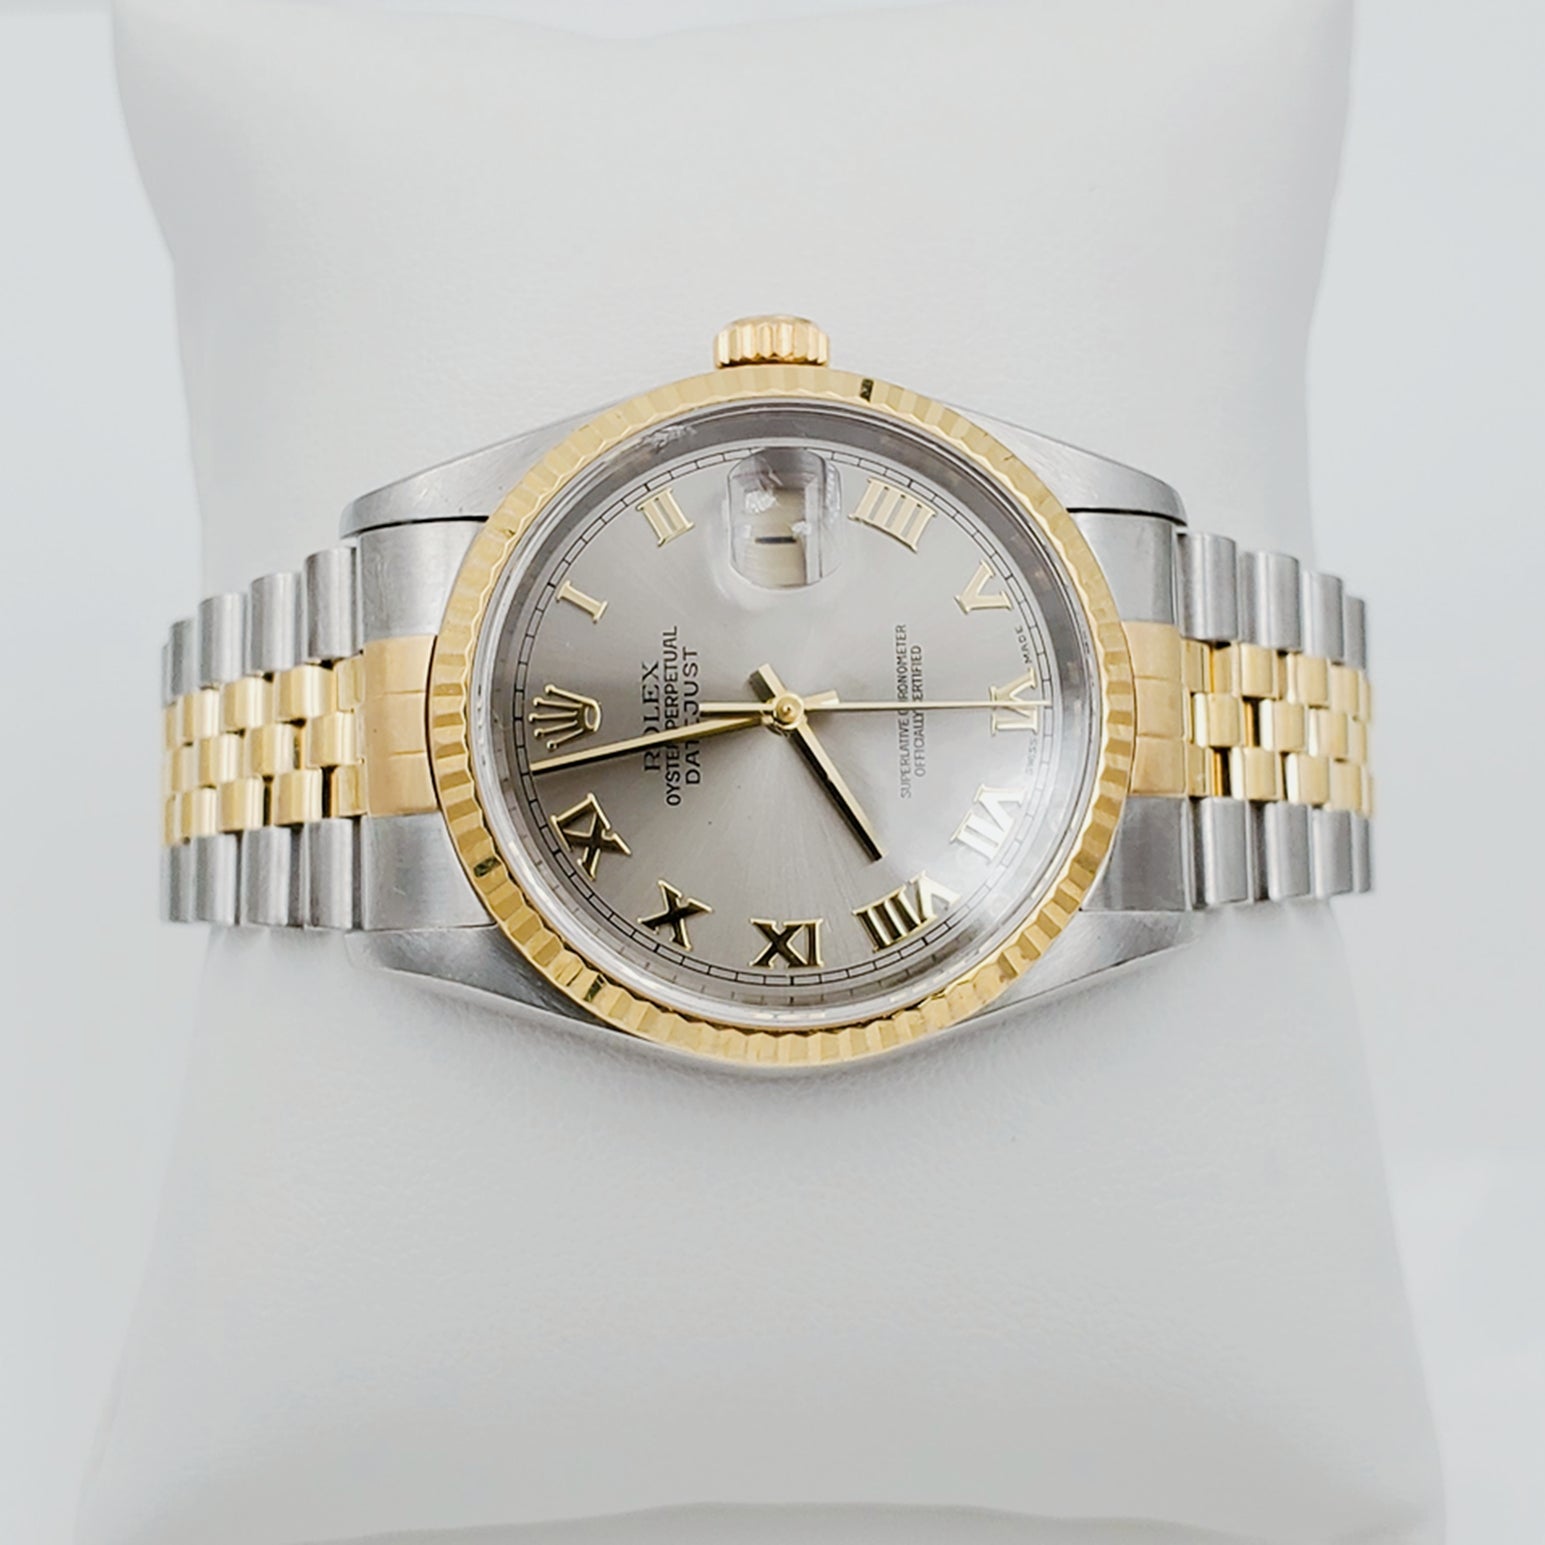 Men's Rolex 36mm DateJust 18k Gold / Stainless Steel Two Tone Watch with Gold Numeral, Light Grey Dial and Fluted Bezel. (Pre-Owned 16233)